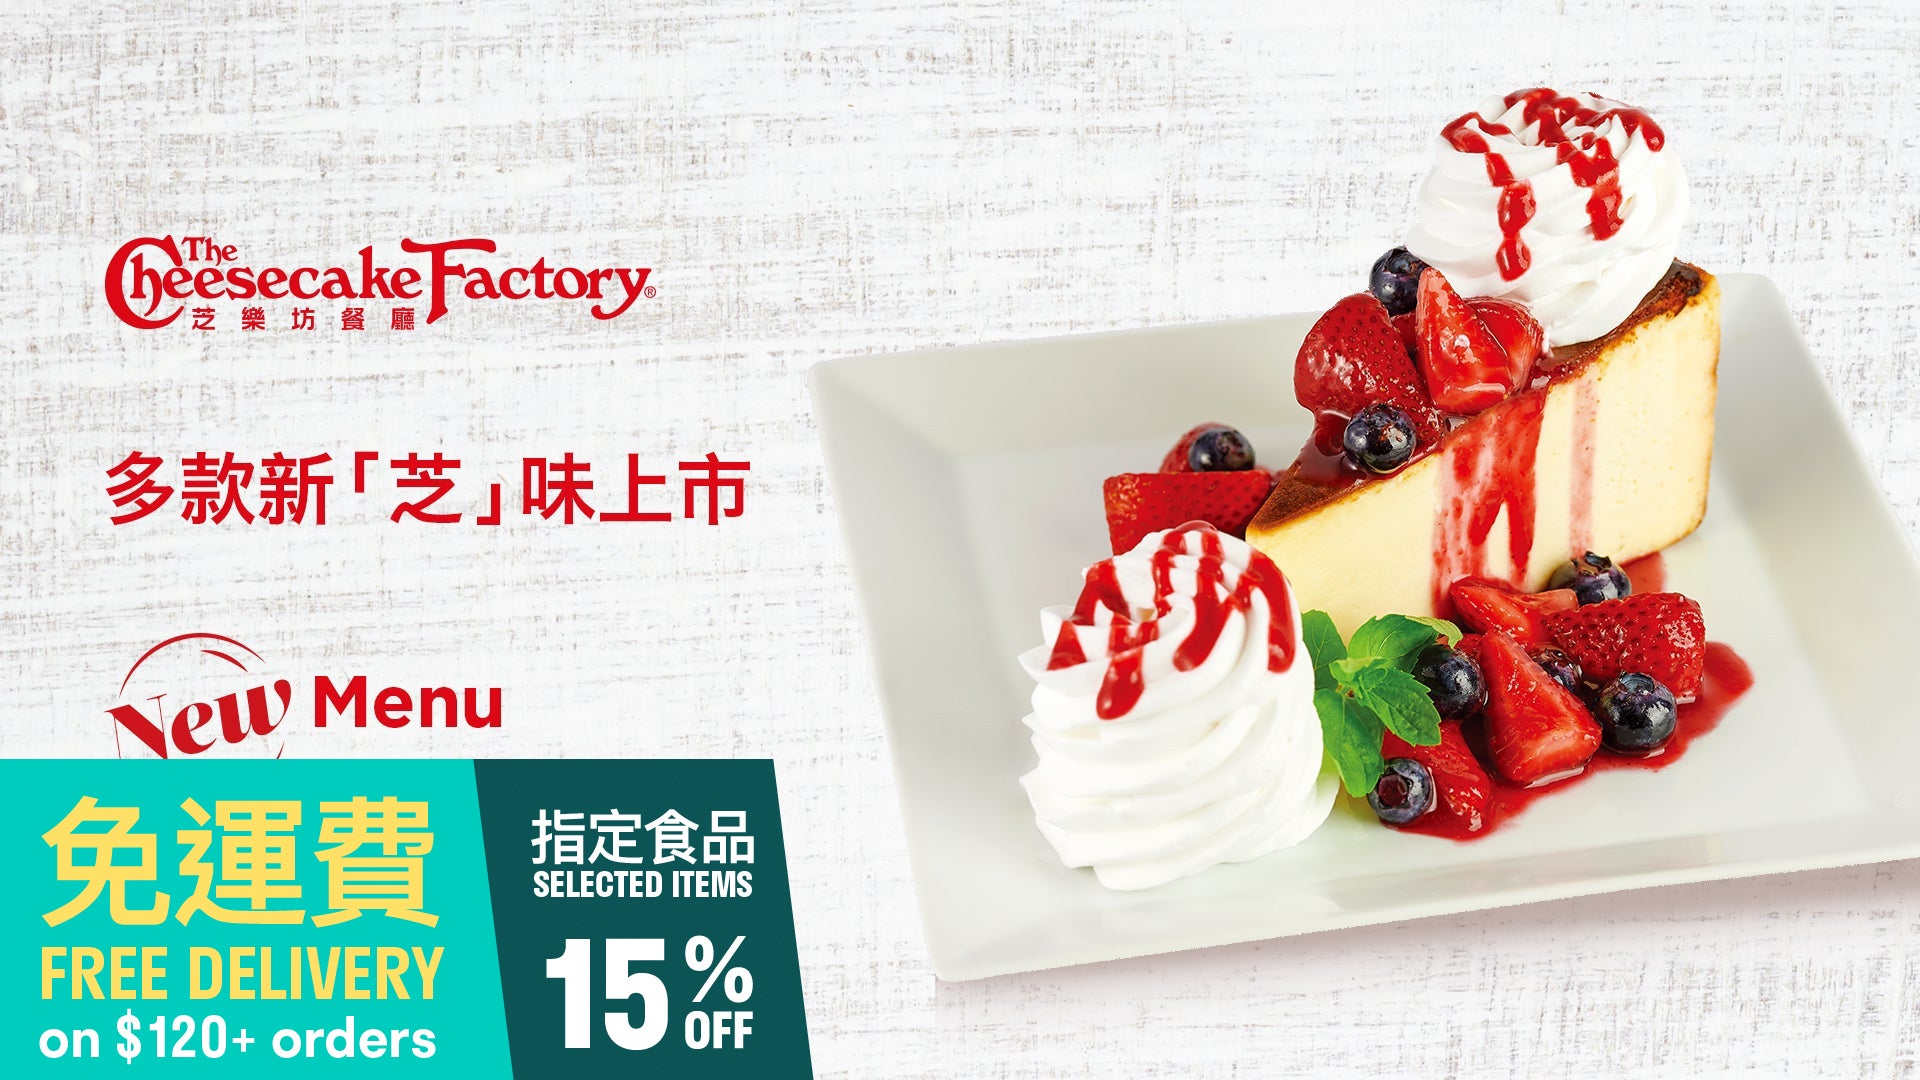 The Cheesecake Factory 芝樂坊餐廳delivery from Tsim Sha Tsui